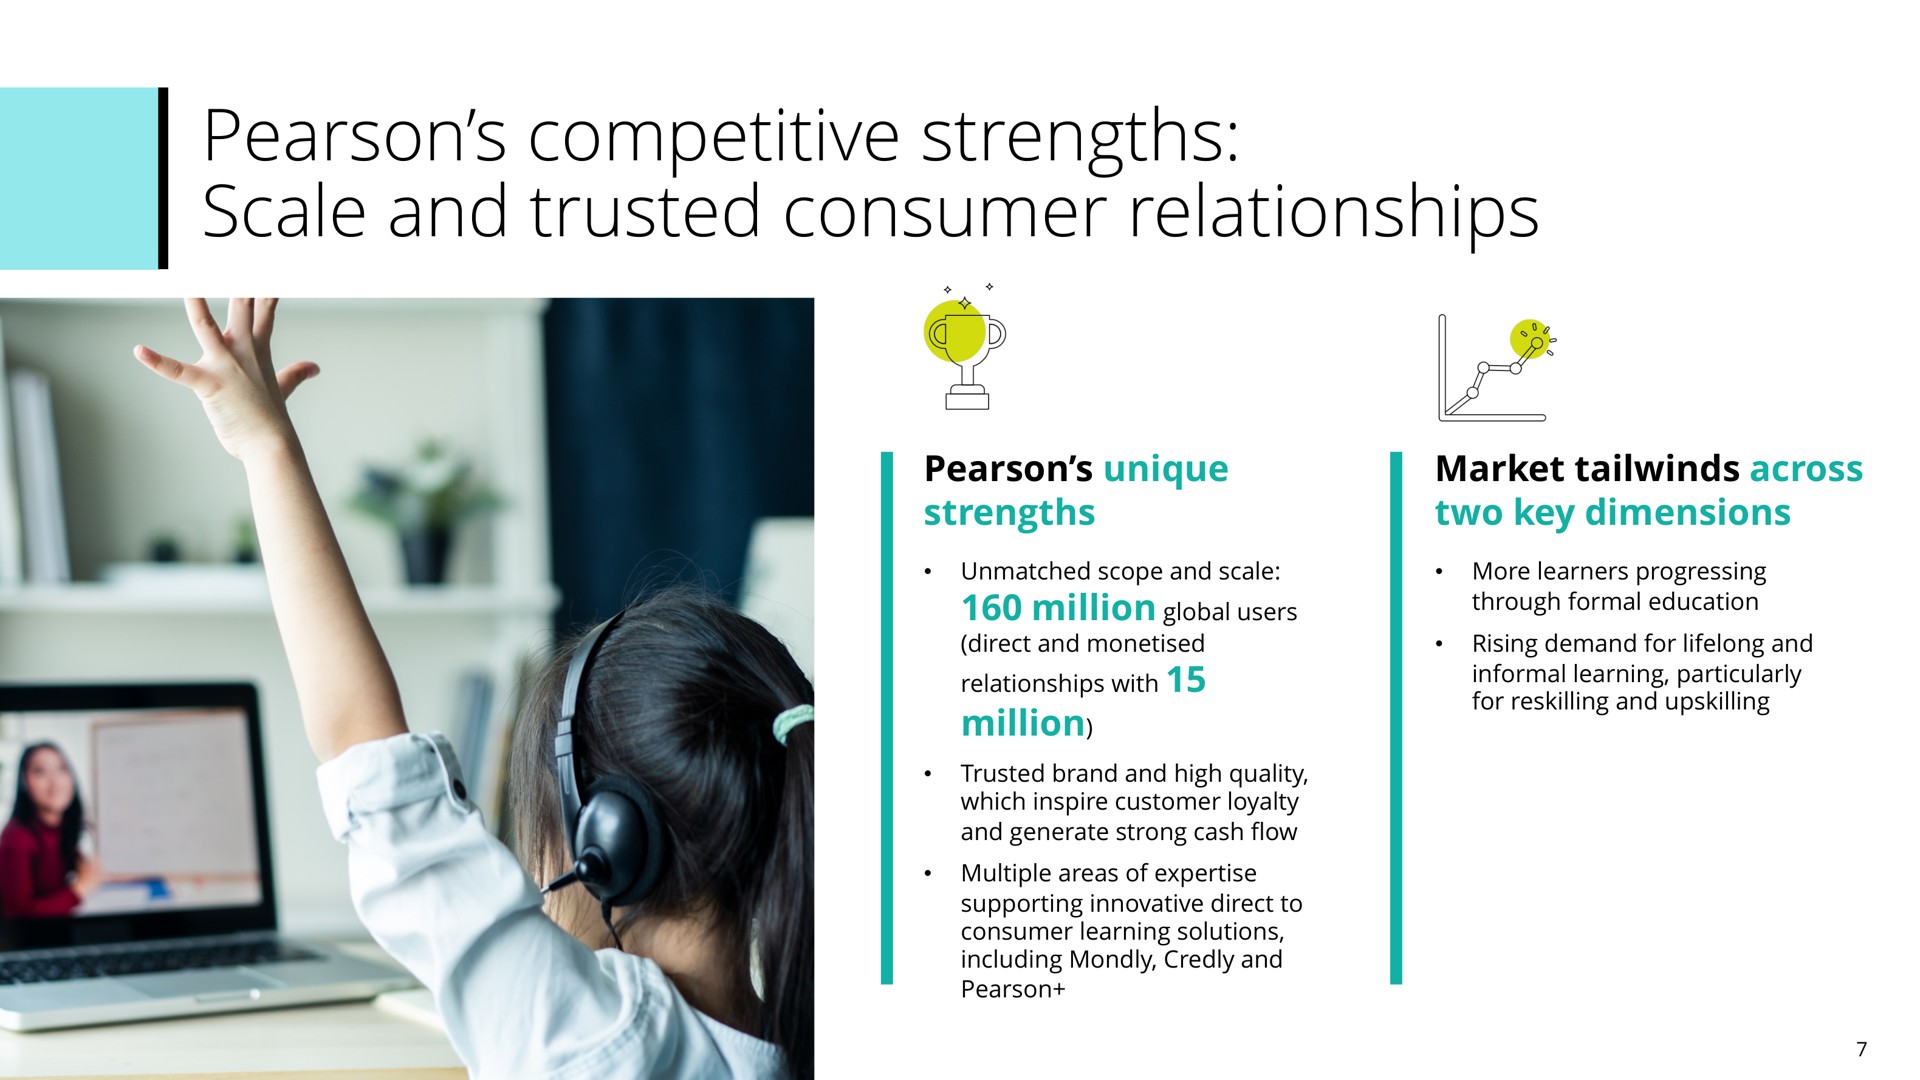 competitive strengths scale and trusted consumer relationships | Pearson